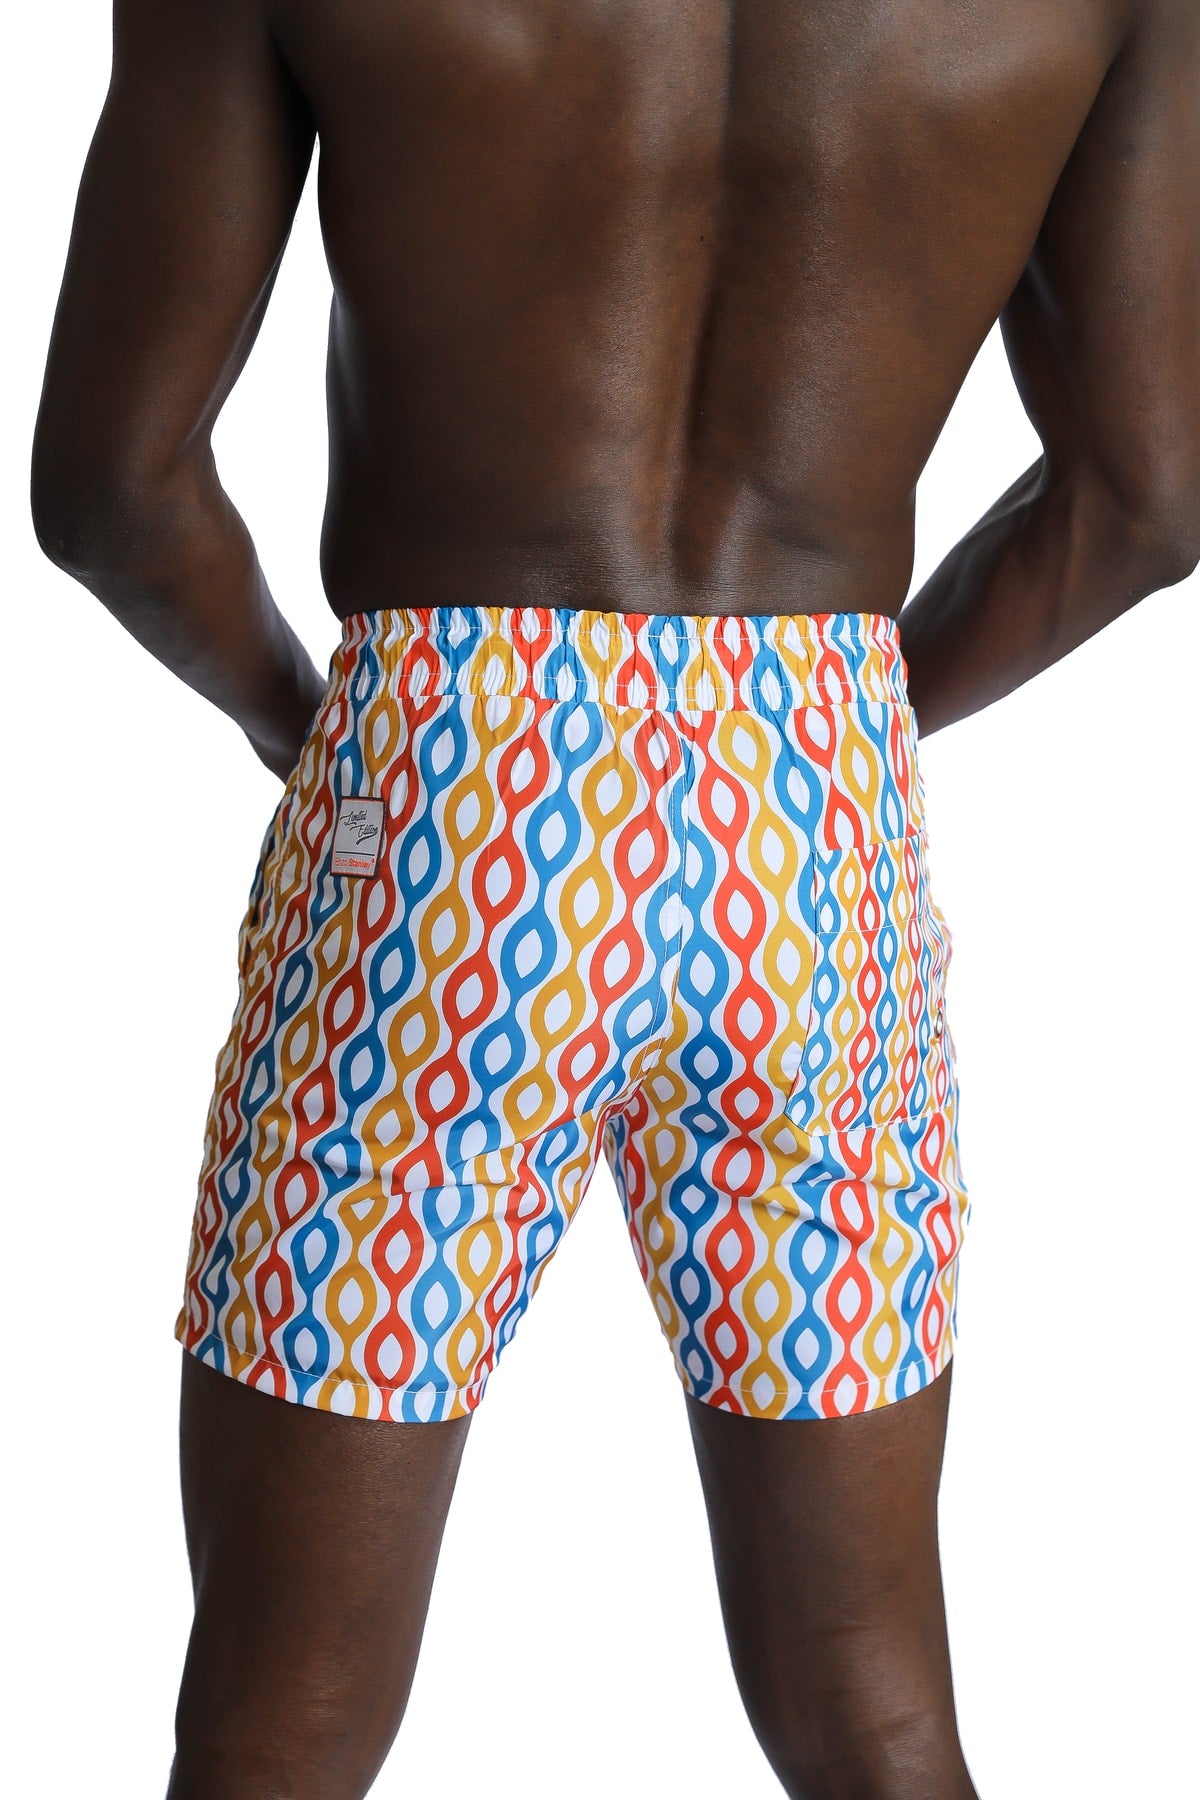 Men's Patterned Colorful Sea Shorts